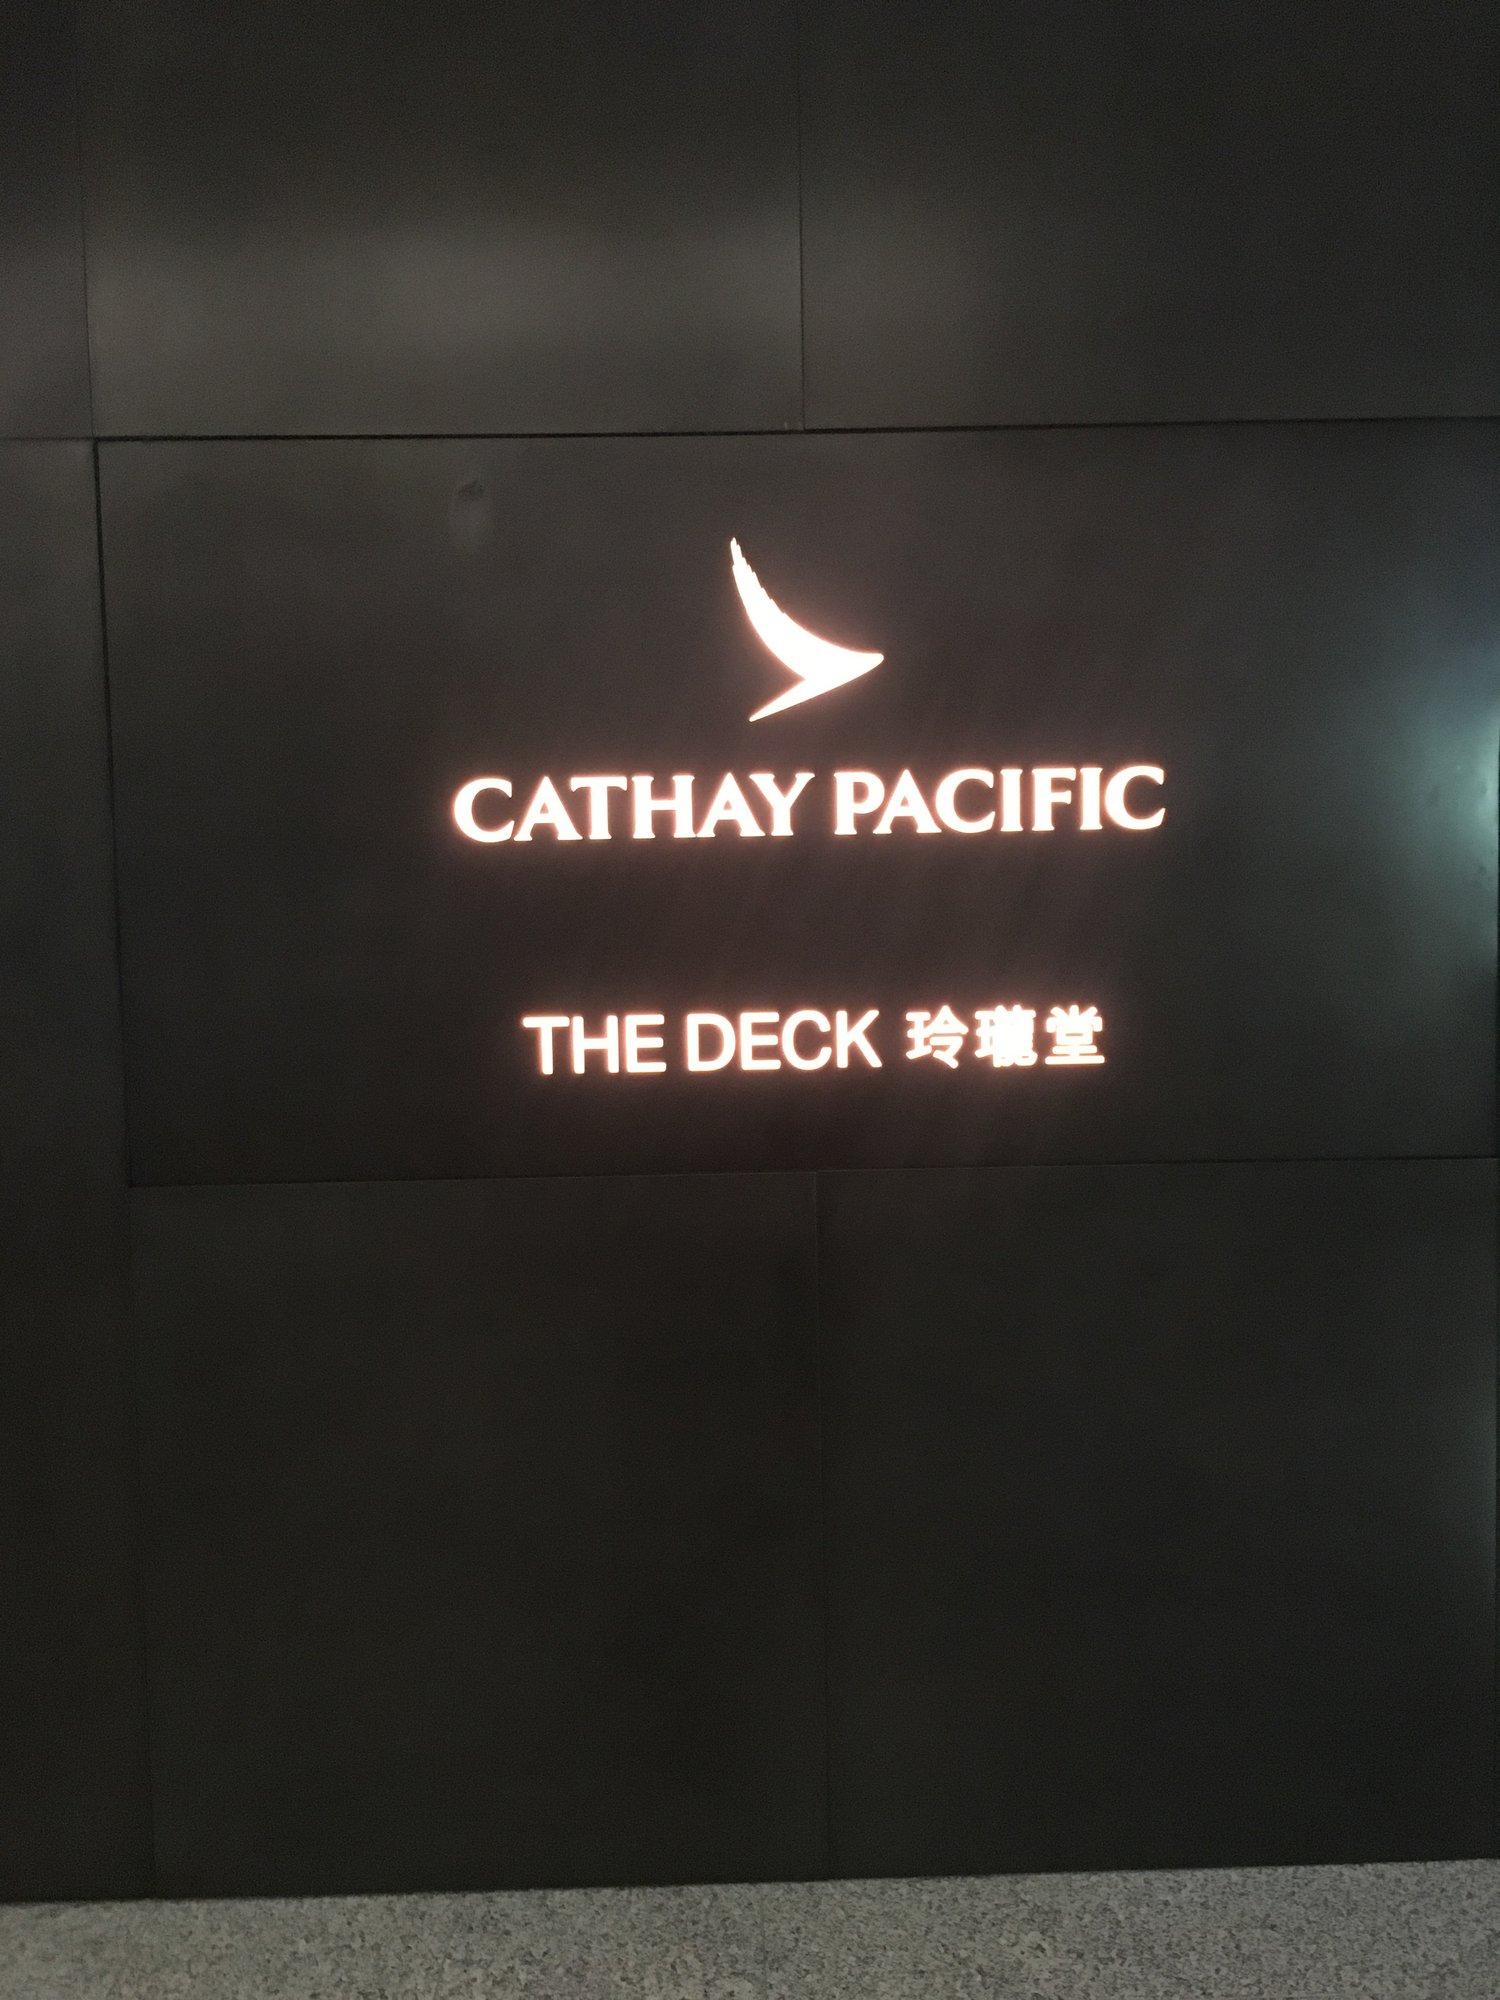 Cathay Pacific The Deck image 27 of 33